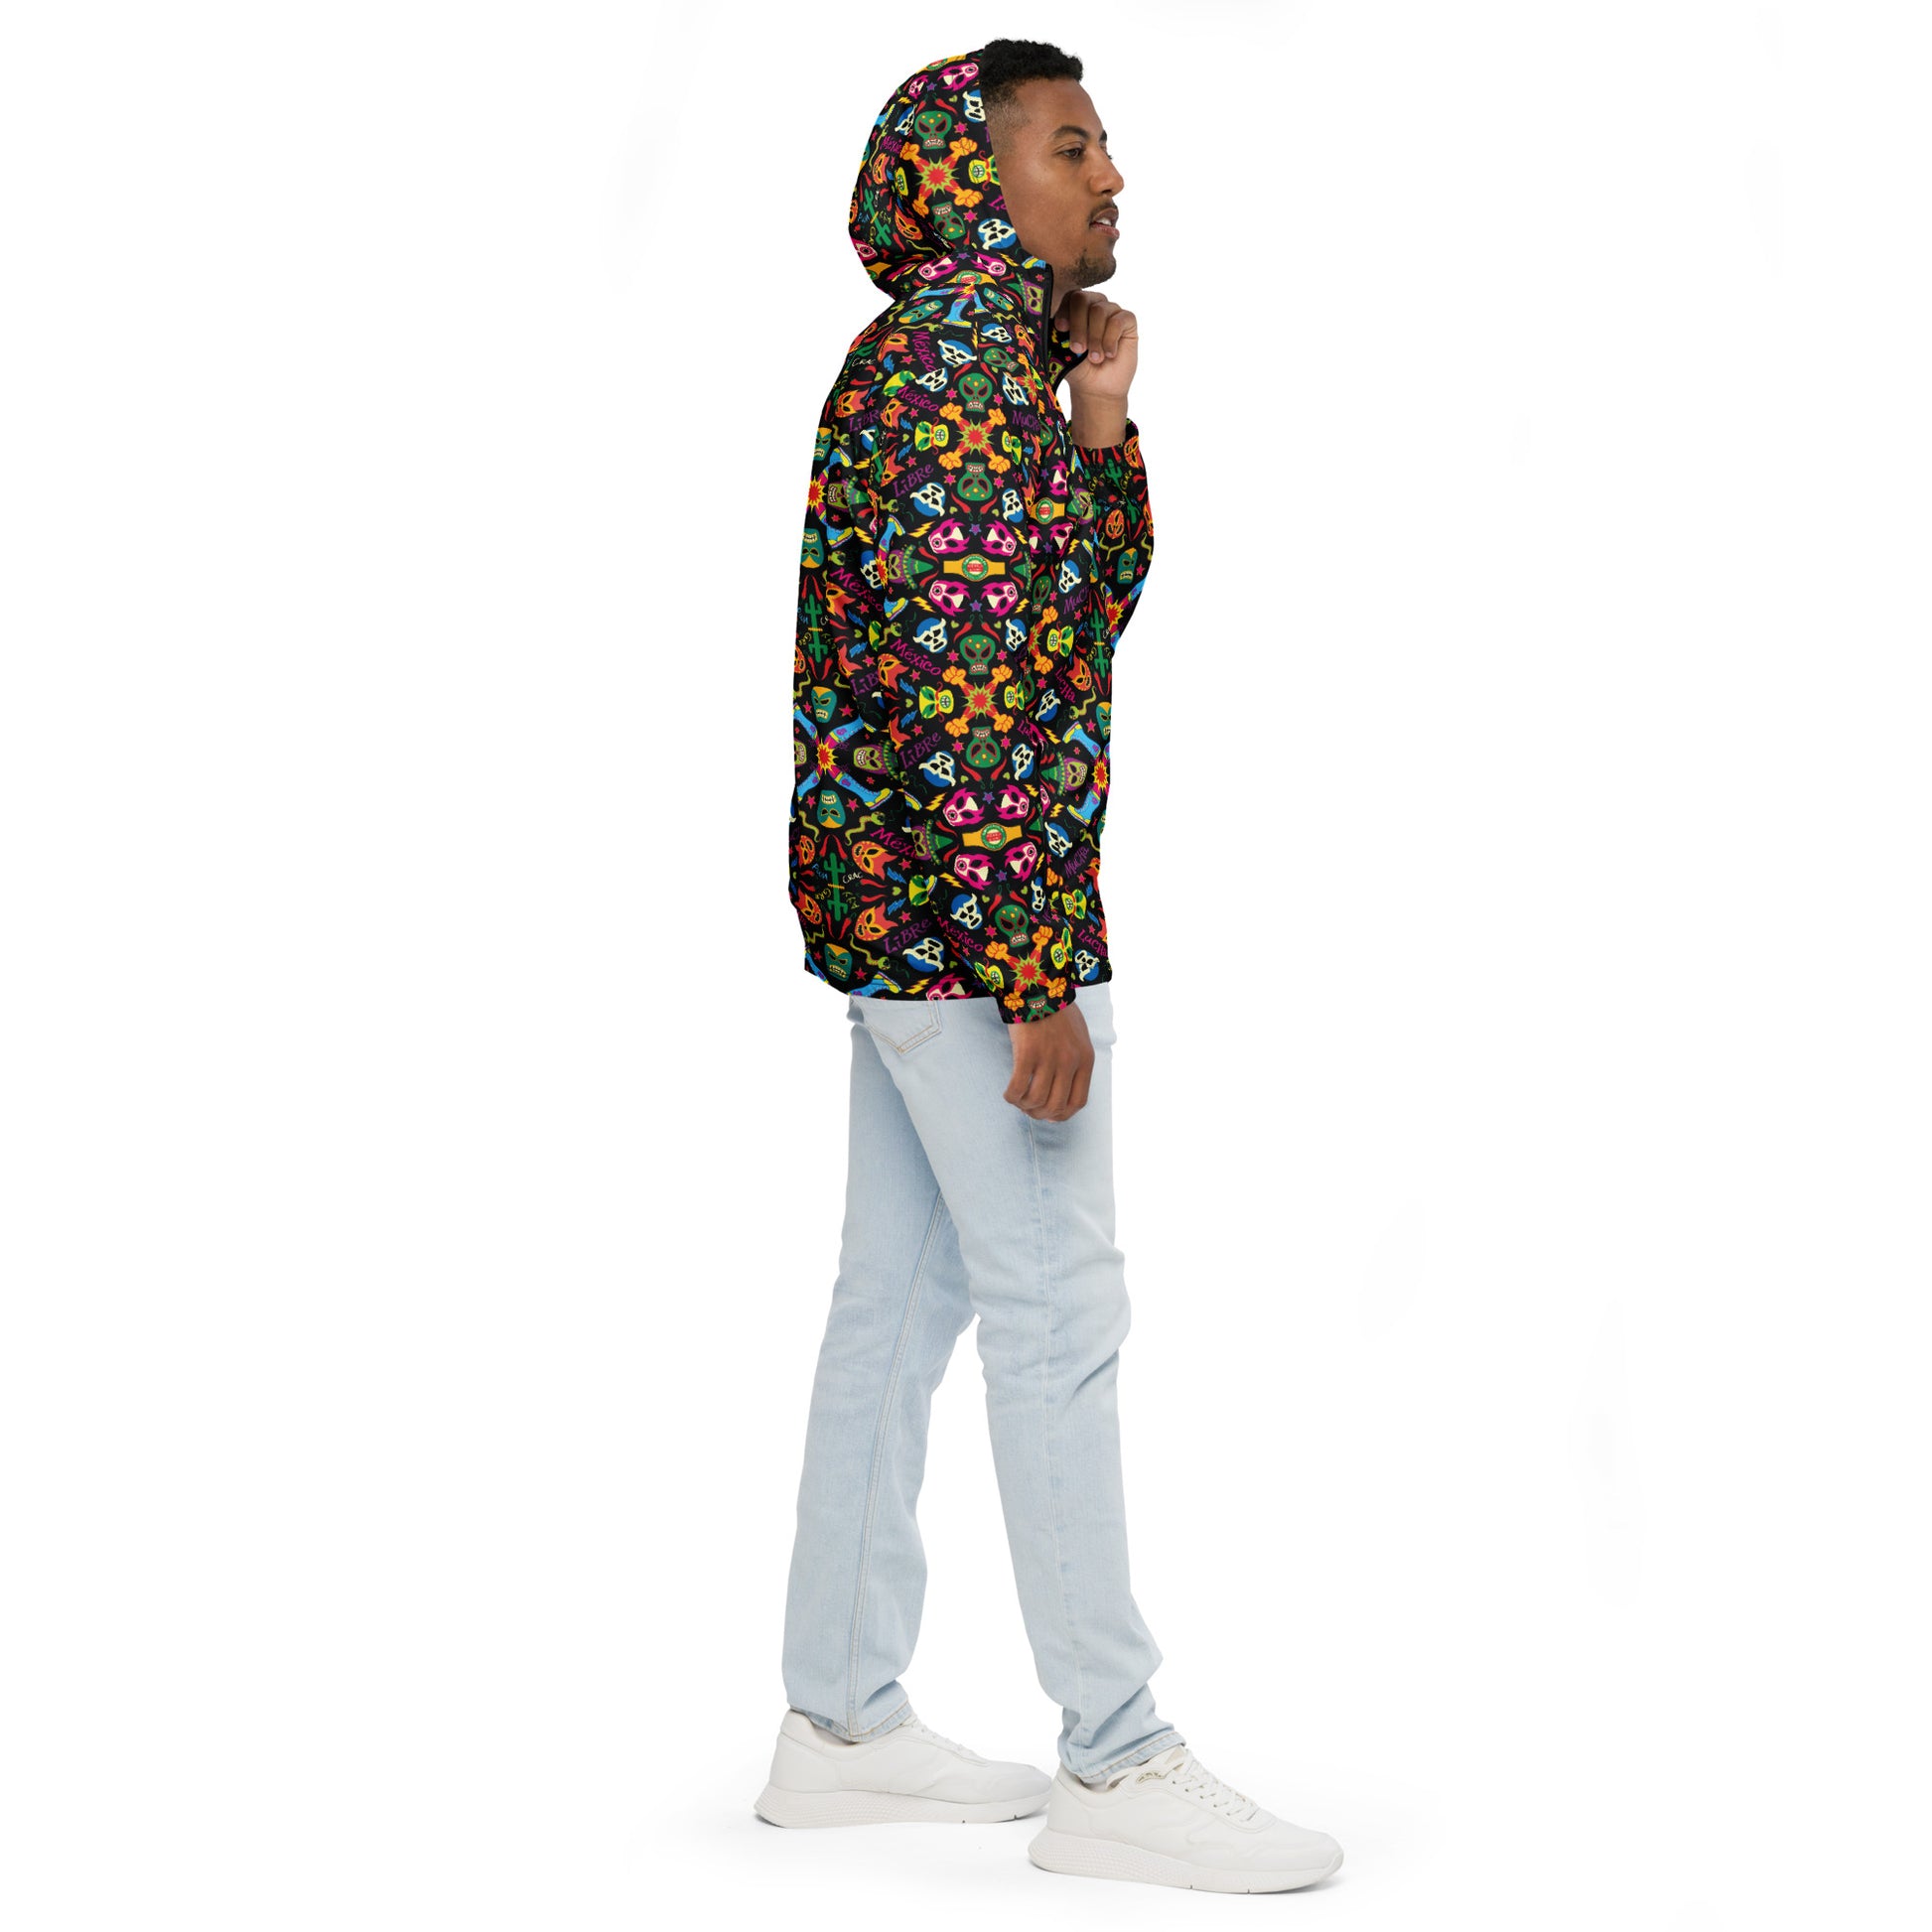 Mexican wrestling colorful party Men’s windbreaker. Side view